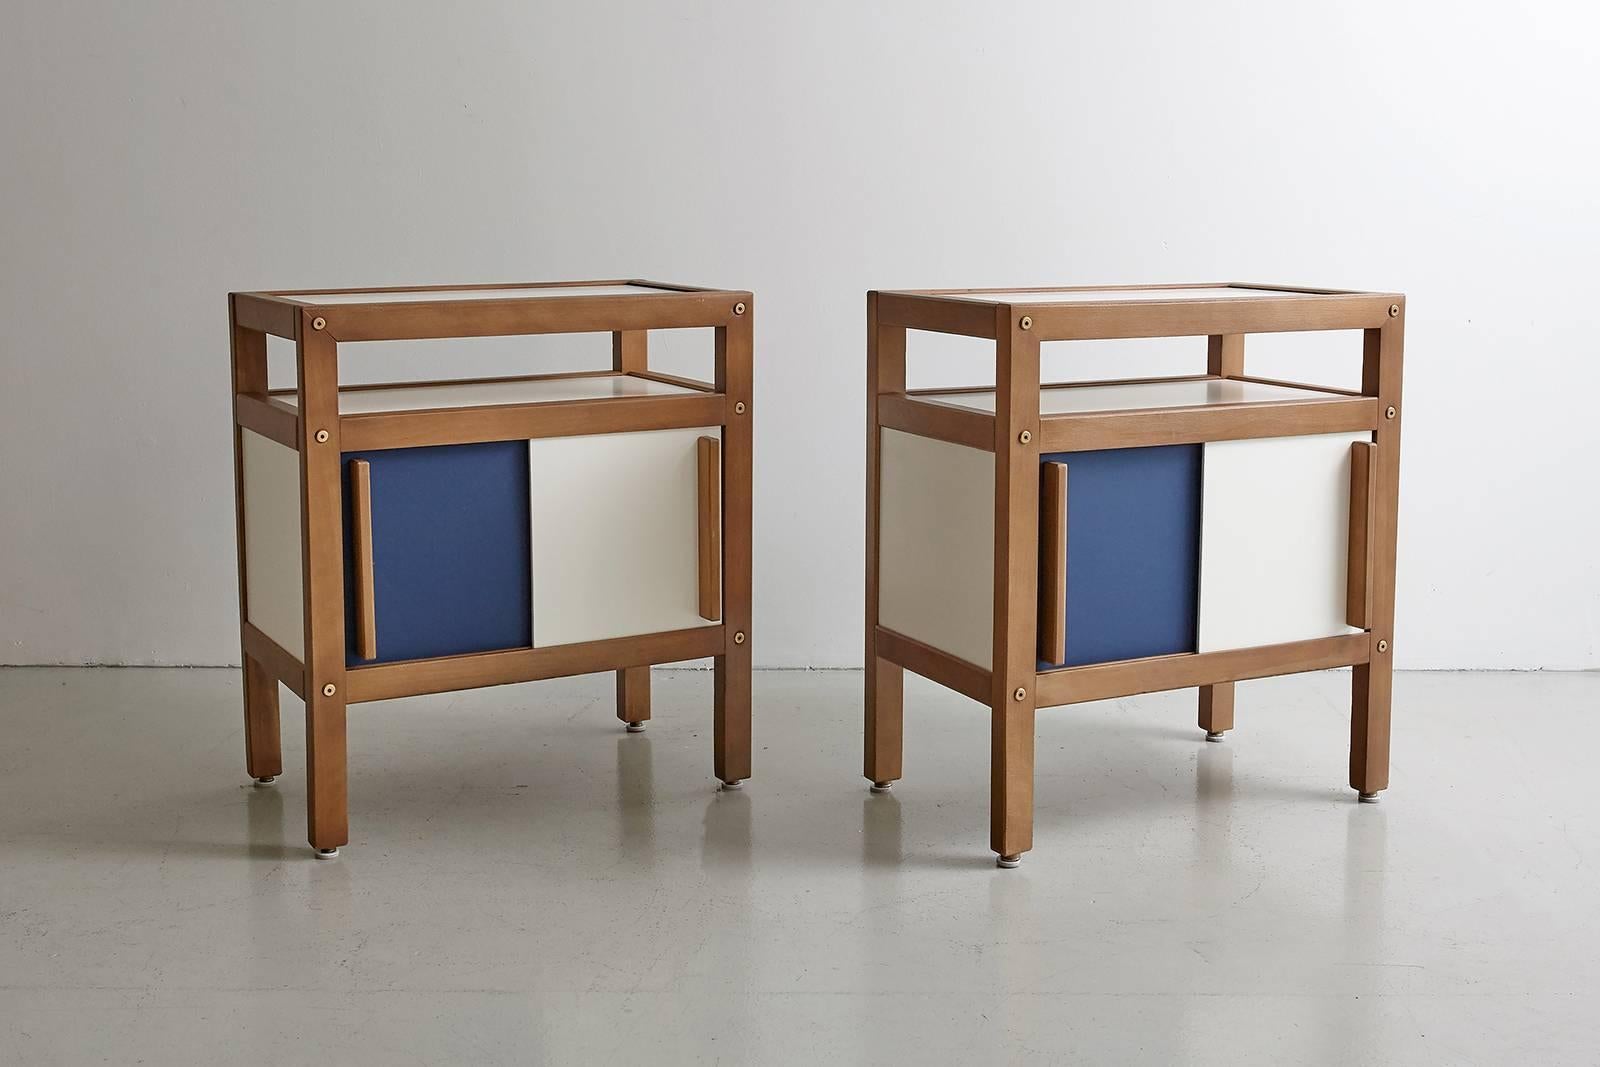 Pair of Andre Sornay end tables produced in 1950s, France. 

Constructed of teak wood, contrasting cobalt blue and white sliding doors open to reveal storage and extra shelf. Great wood handle detail.